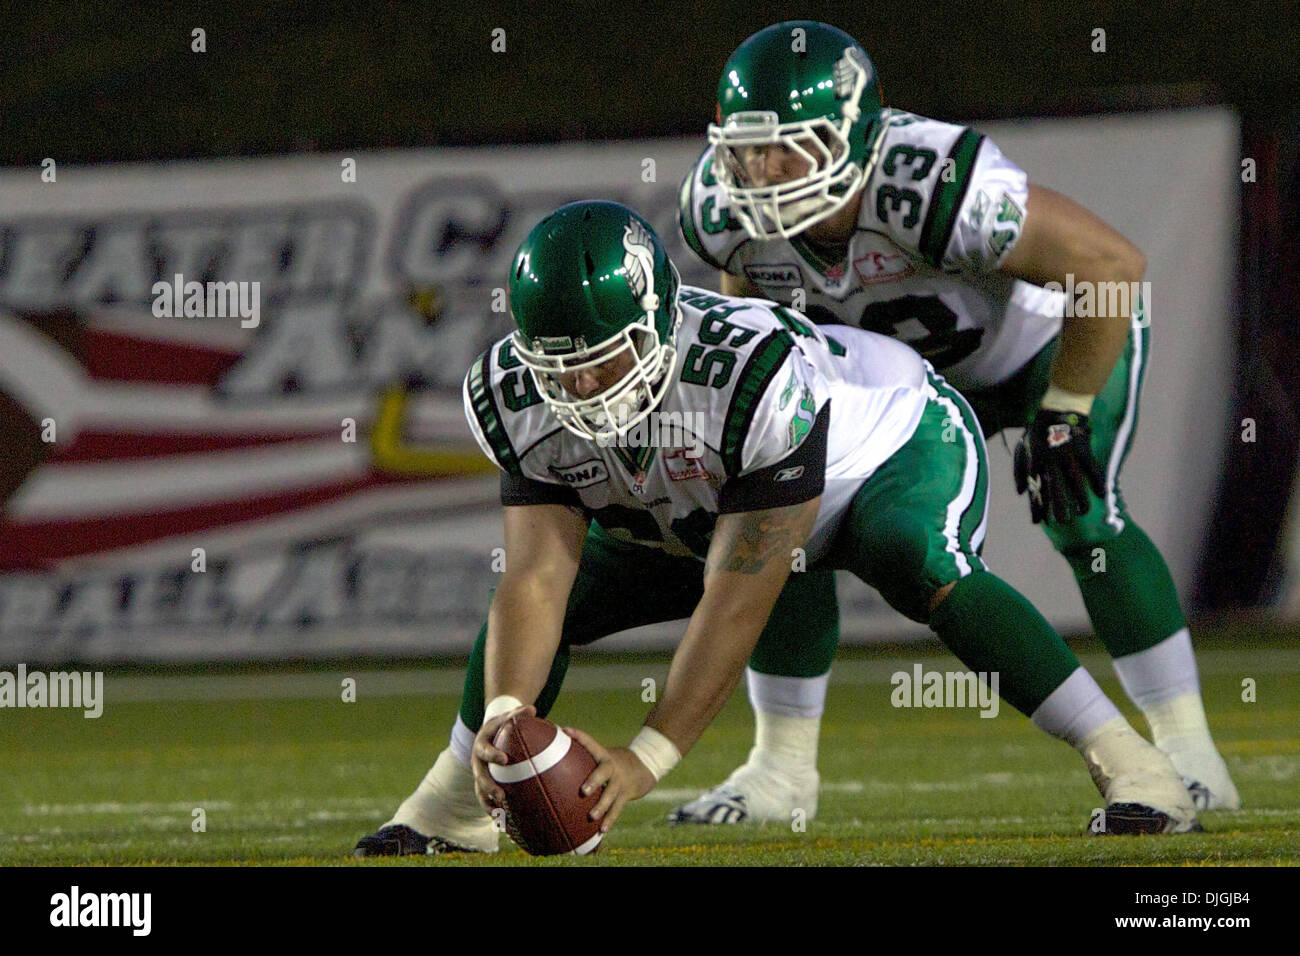 July 24, 2010 - Calgary, Alberta, Canada - 24 July 2010: Saskatchewan Roughriders long snapper Jocelyn Frenette (59) and running back Chris Szarka (33)during a game against the Calgary Stampeders at McMahon Stadium in Calgary, Alberta.  The Calgary Stampeders defeated the Saskatchewan Roughriders 40 to 20..Mandatory Credit: Irena Thompson / Southcreek Global (Credit Image: Â© South Stock Photo